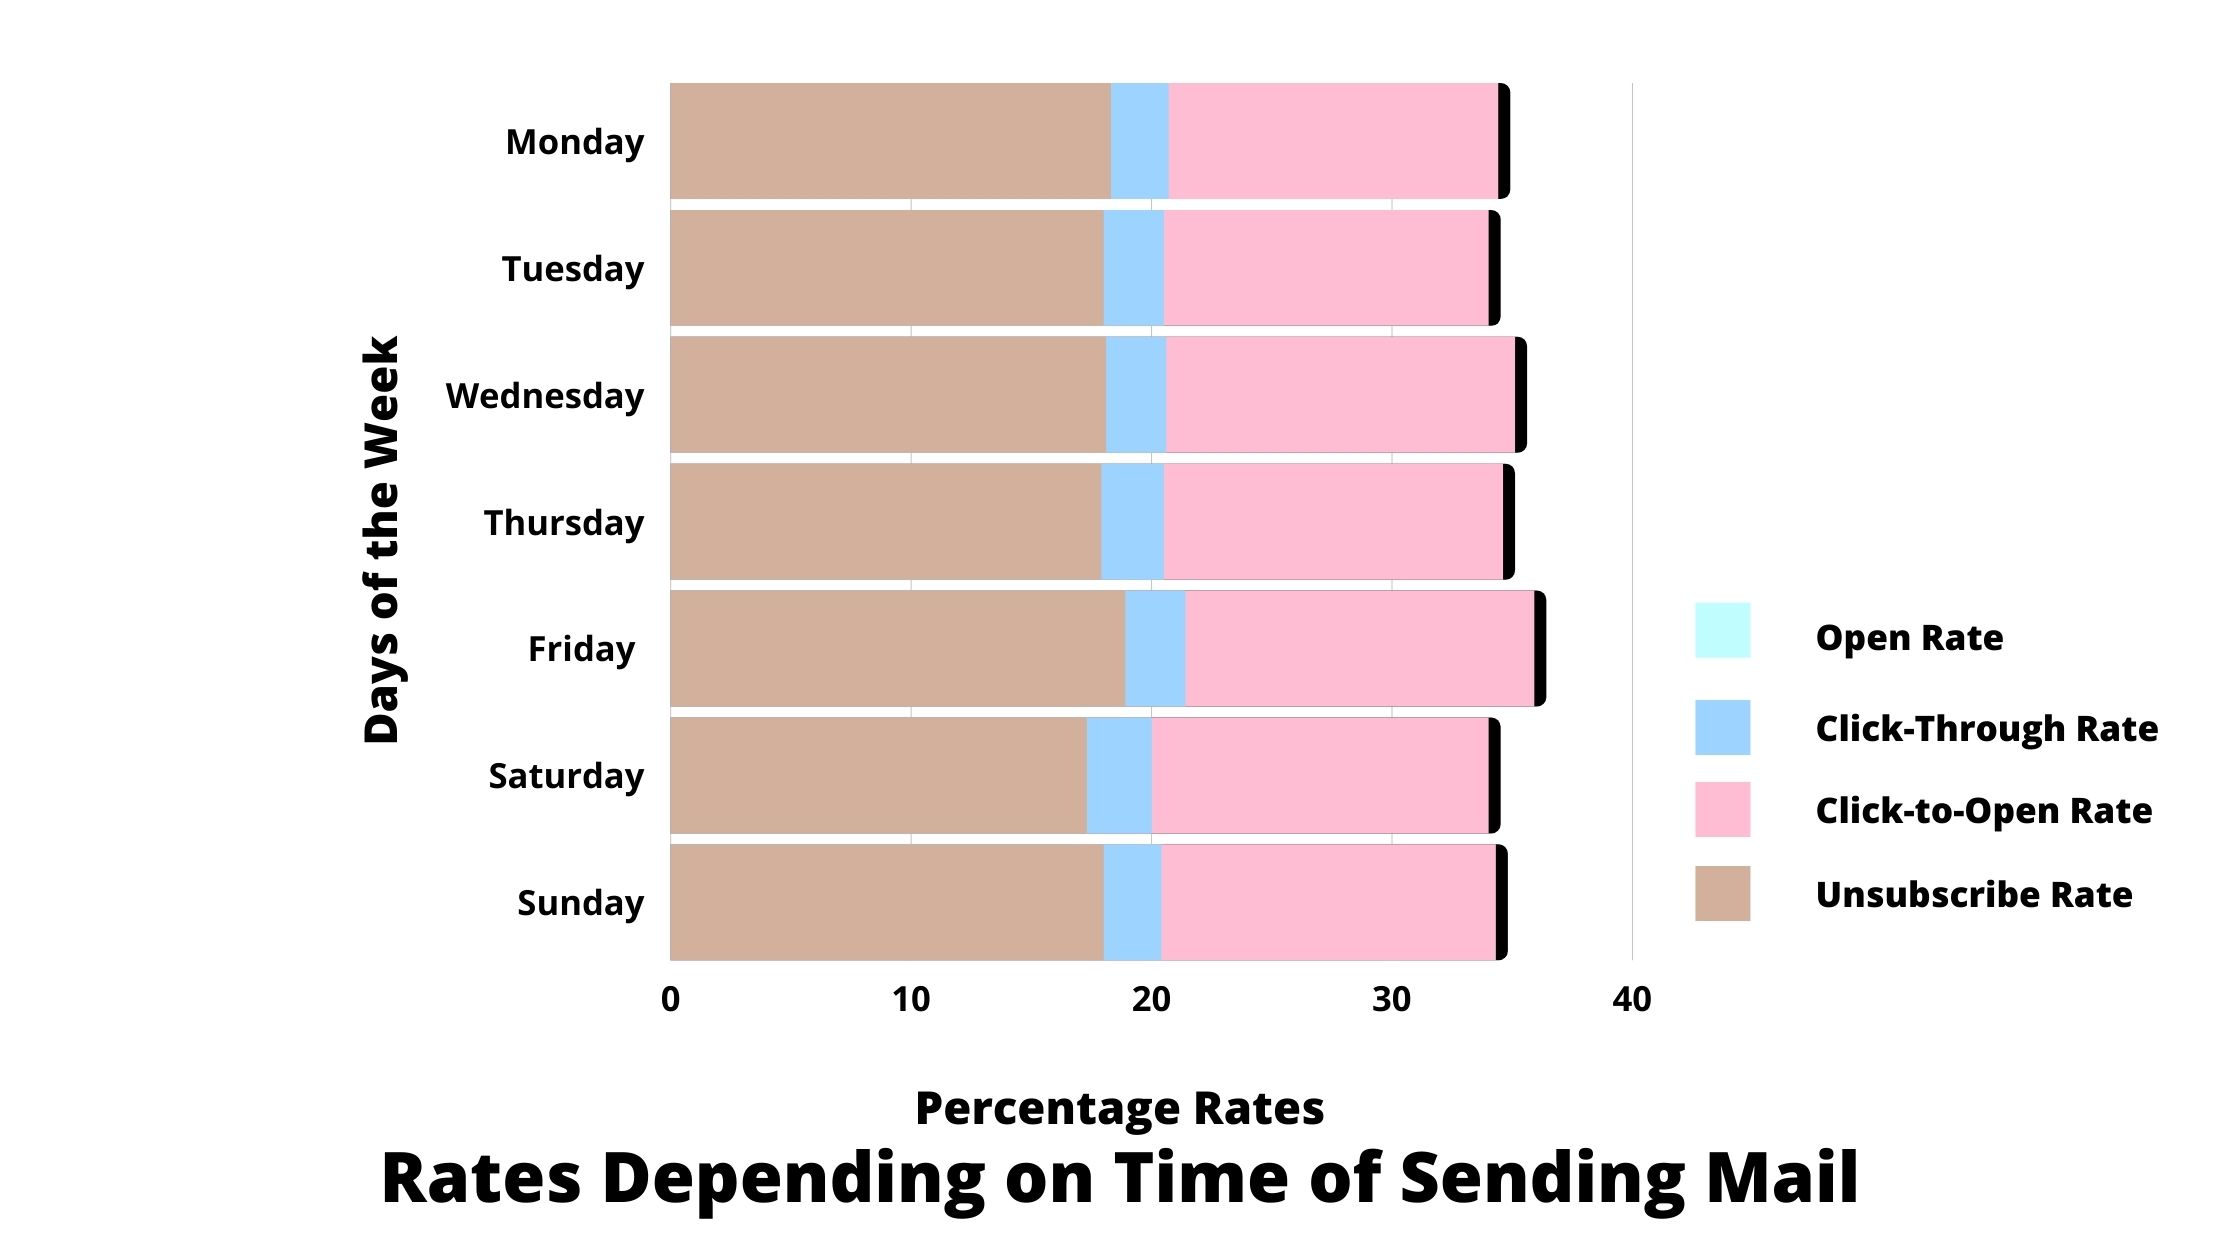 Rates depending on Days of the Week